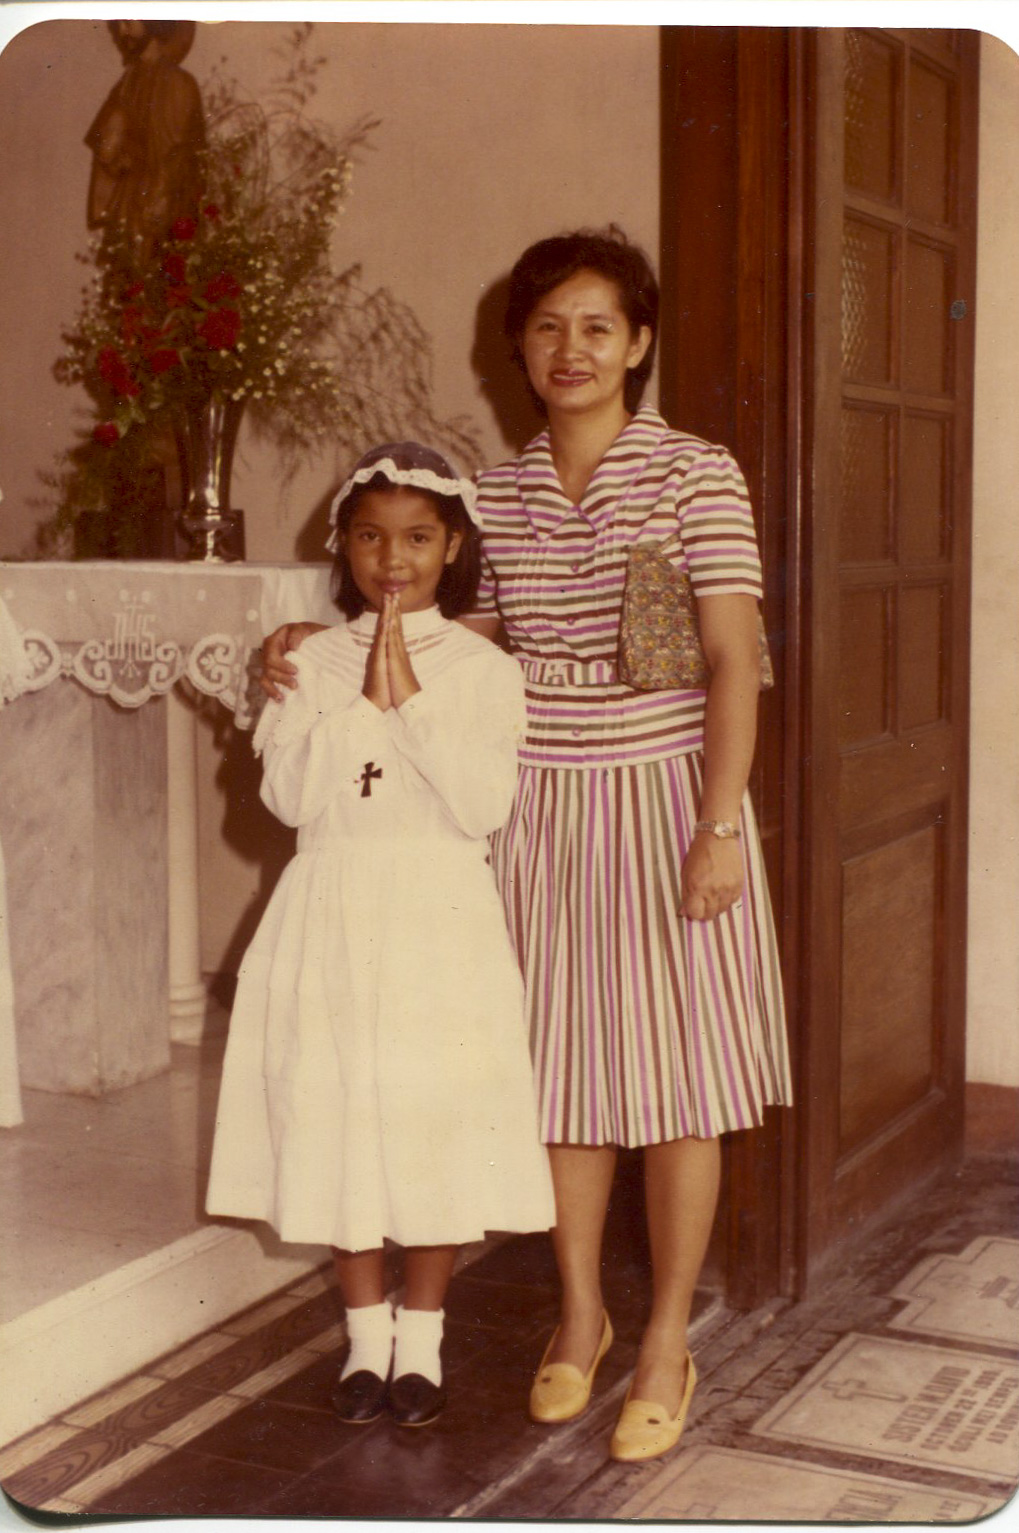 Photo of Escarilla-Carnate and mother, 1982Escarilla-Carnate said, “Taken in February or March 1982 by a professional photographer when I was in 2nd grade at Assumption School in Iloilo City. It was in a family album. Pictured are my mother and me. My catholic faith is important and I continue to practiceCatholicism here in the USA. My son has already had his first communion.” Any views, findings, conclusions, or recommendations expressed in this story do not necessarily represent those of the National Endowment for the Humanities. 